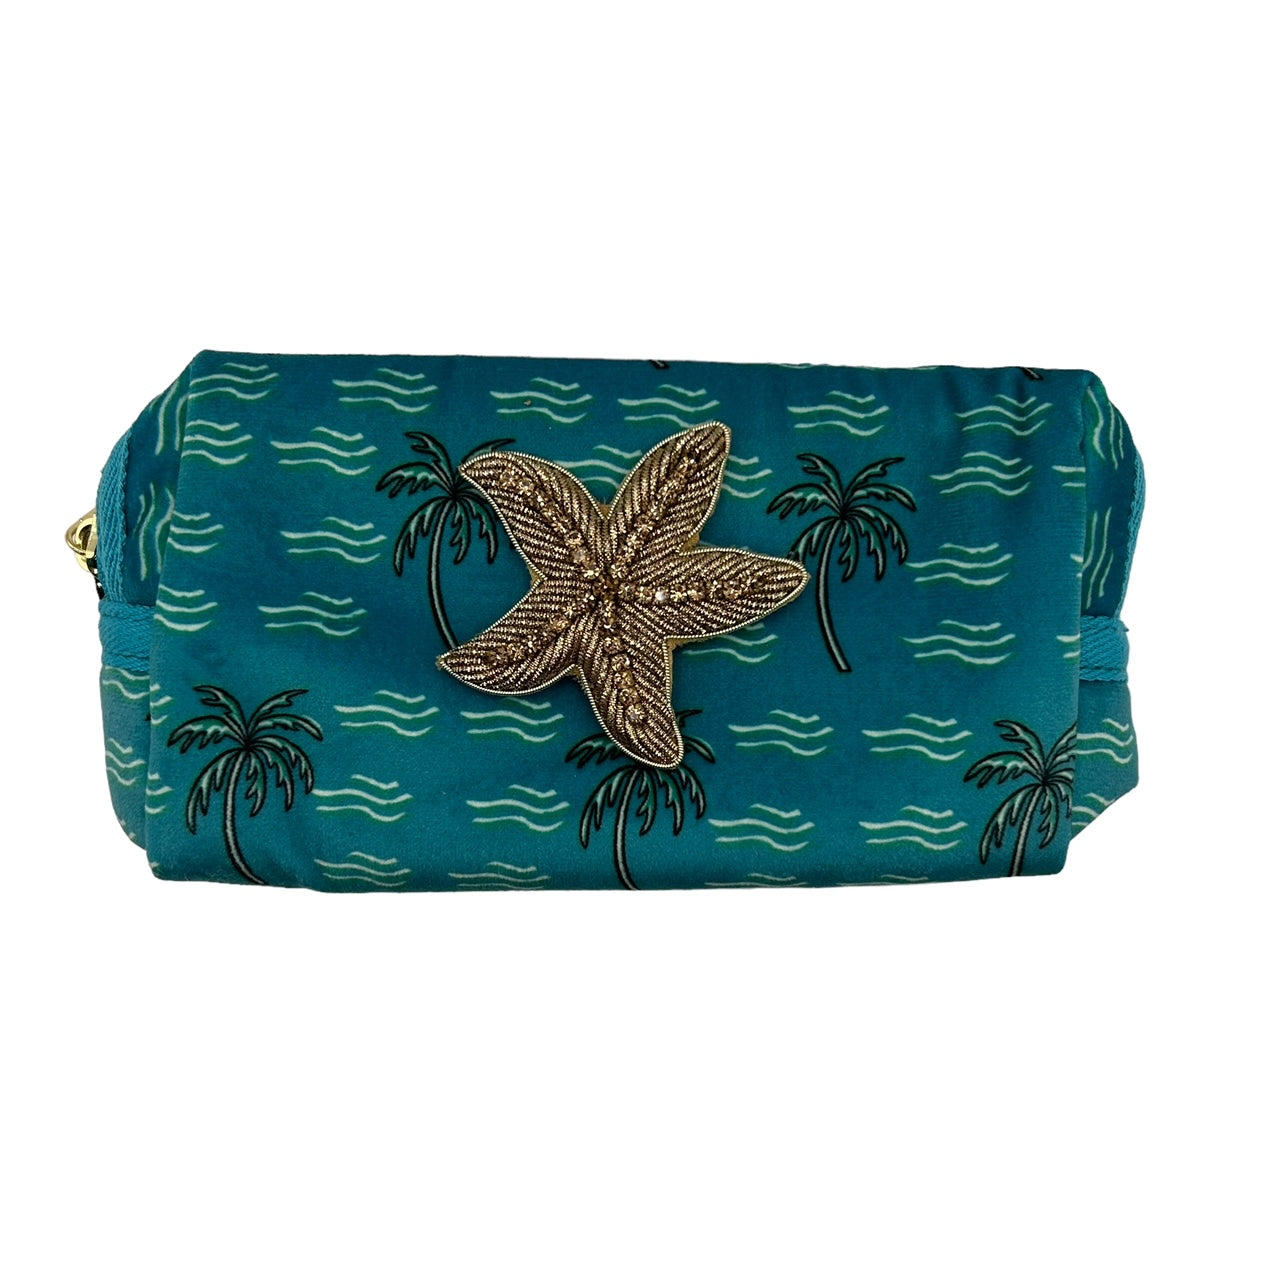 Teal palm large make-up bag & a starfish brooch - recycled velvet, large and small